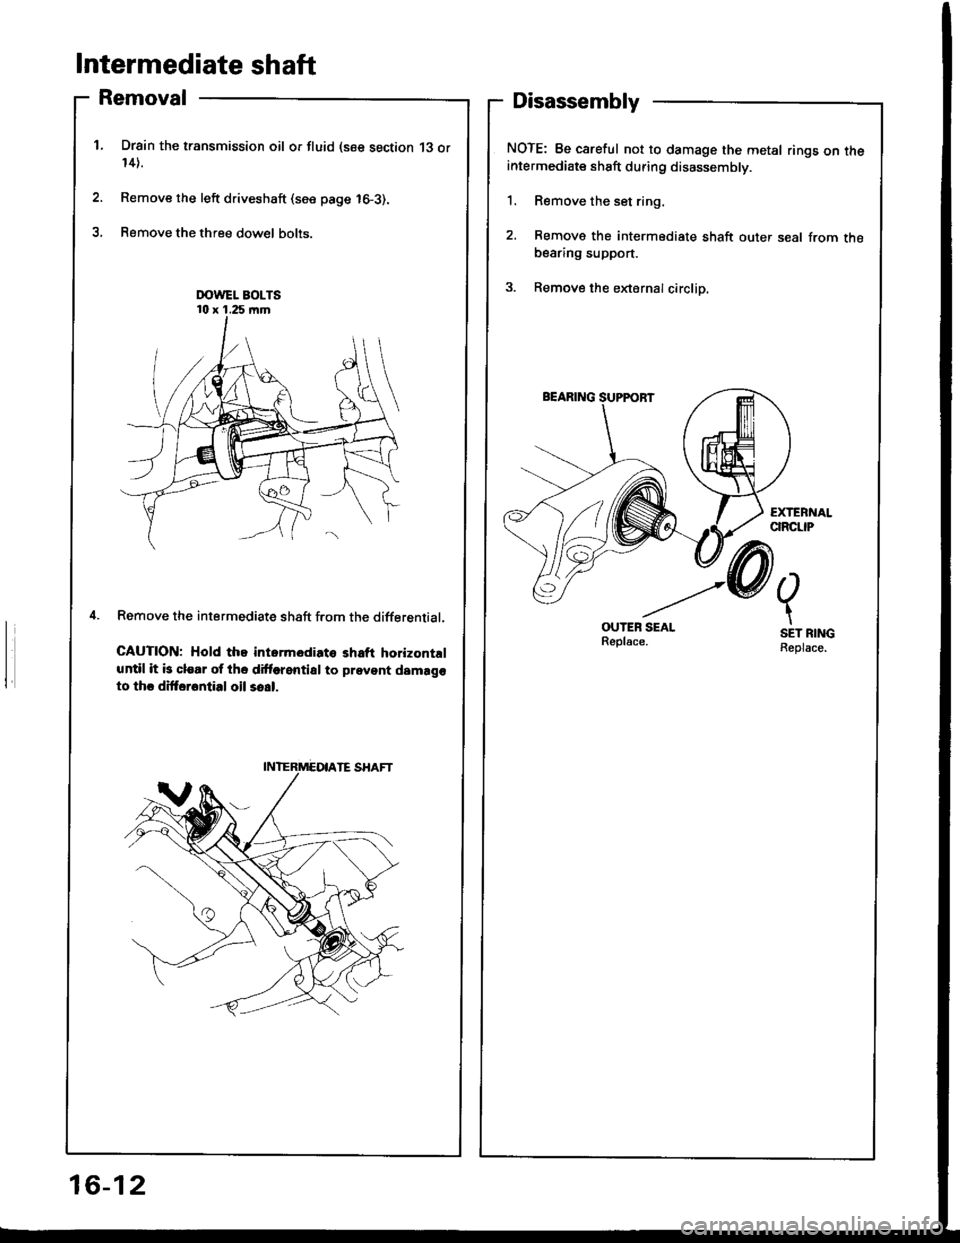 HONDA INTEGRA 1994 4.G User Guide Intermediate shaft
Removal
Drsin the transmission oil or fluid (see section 13 or14).
Remove the left driveshaft (see page 16-3).
Remove the three dow€l bolts.
Remove the intermediate shaft f.om the